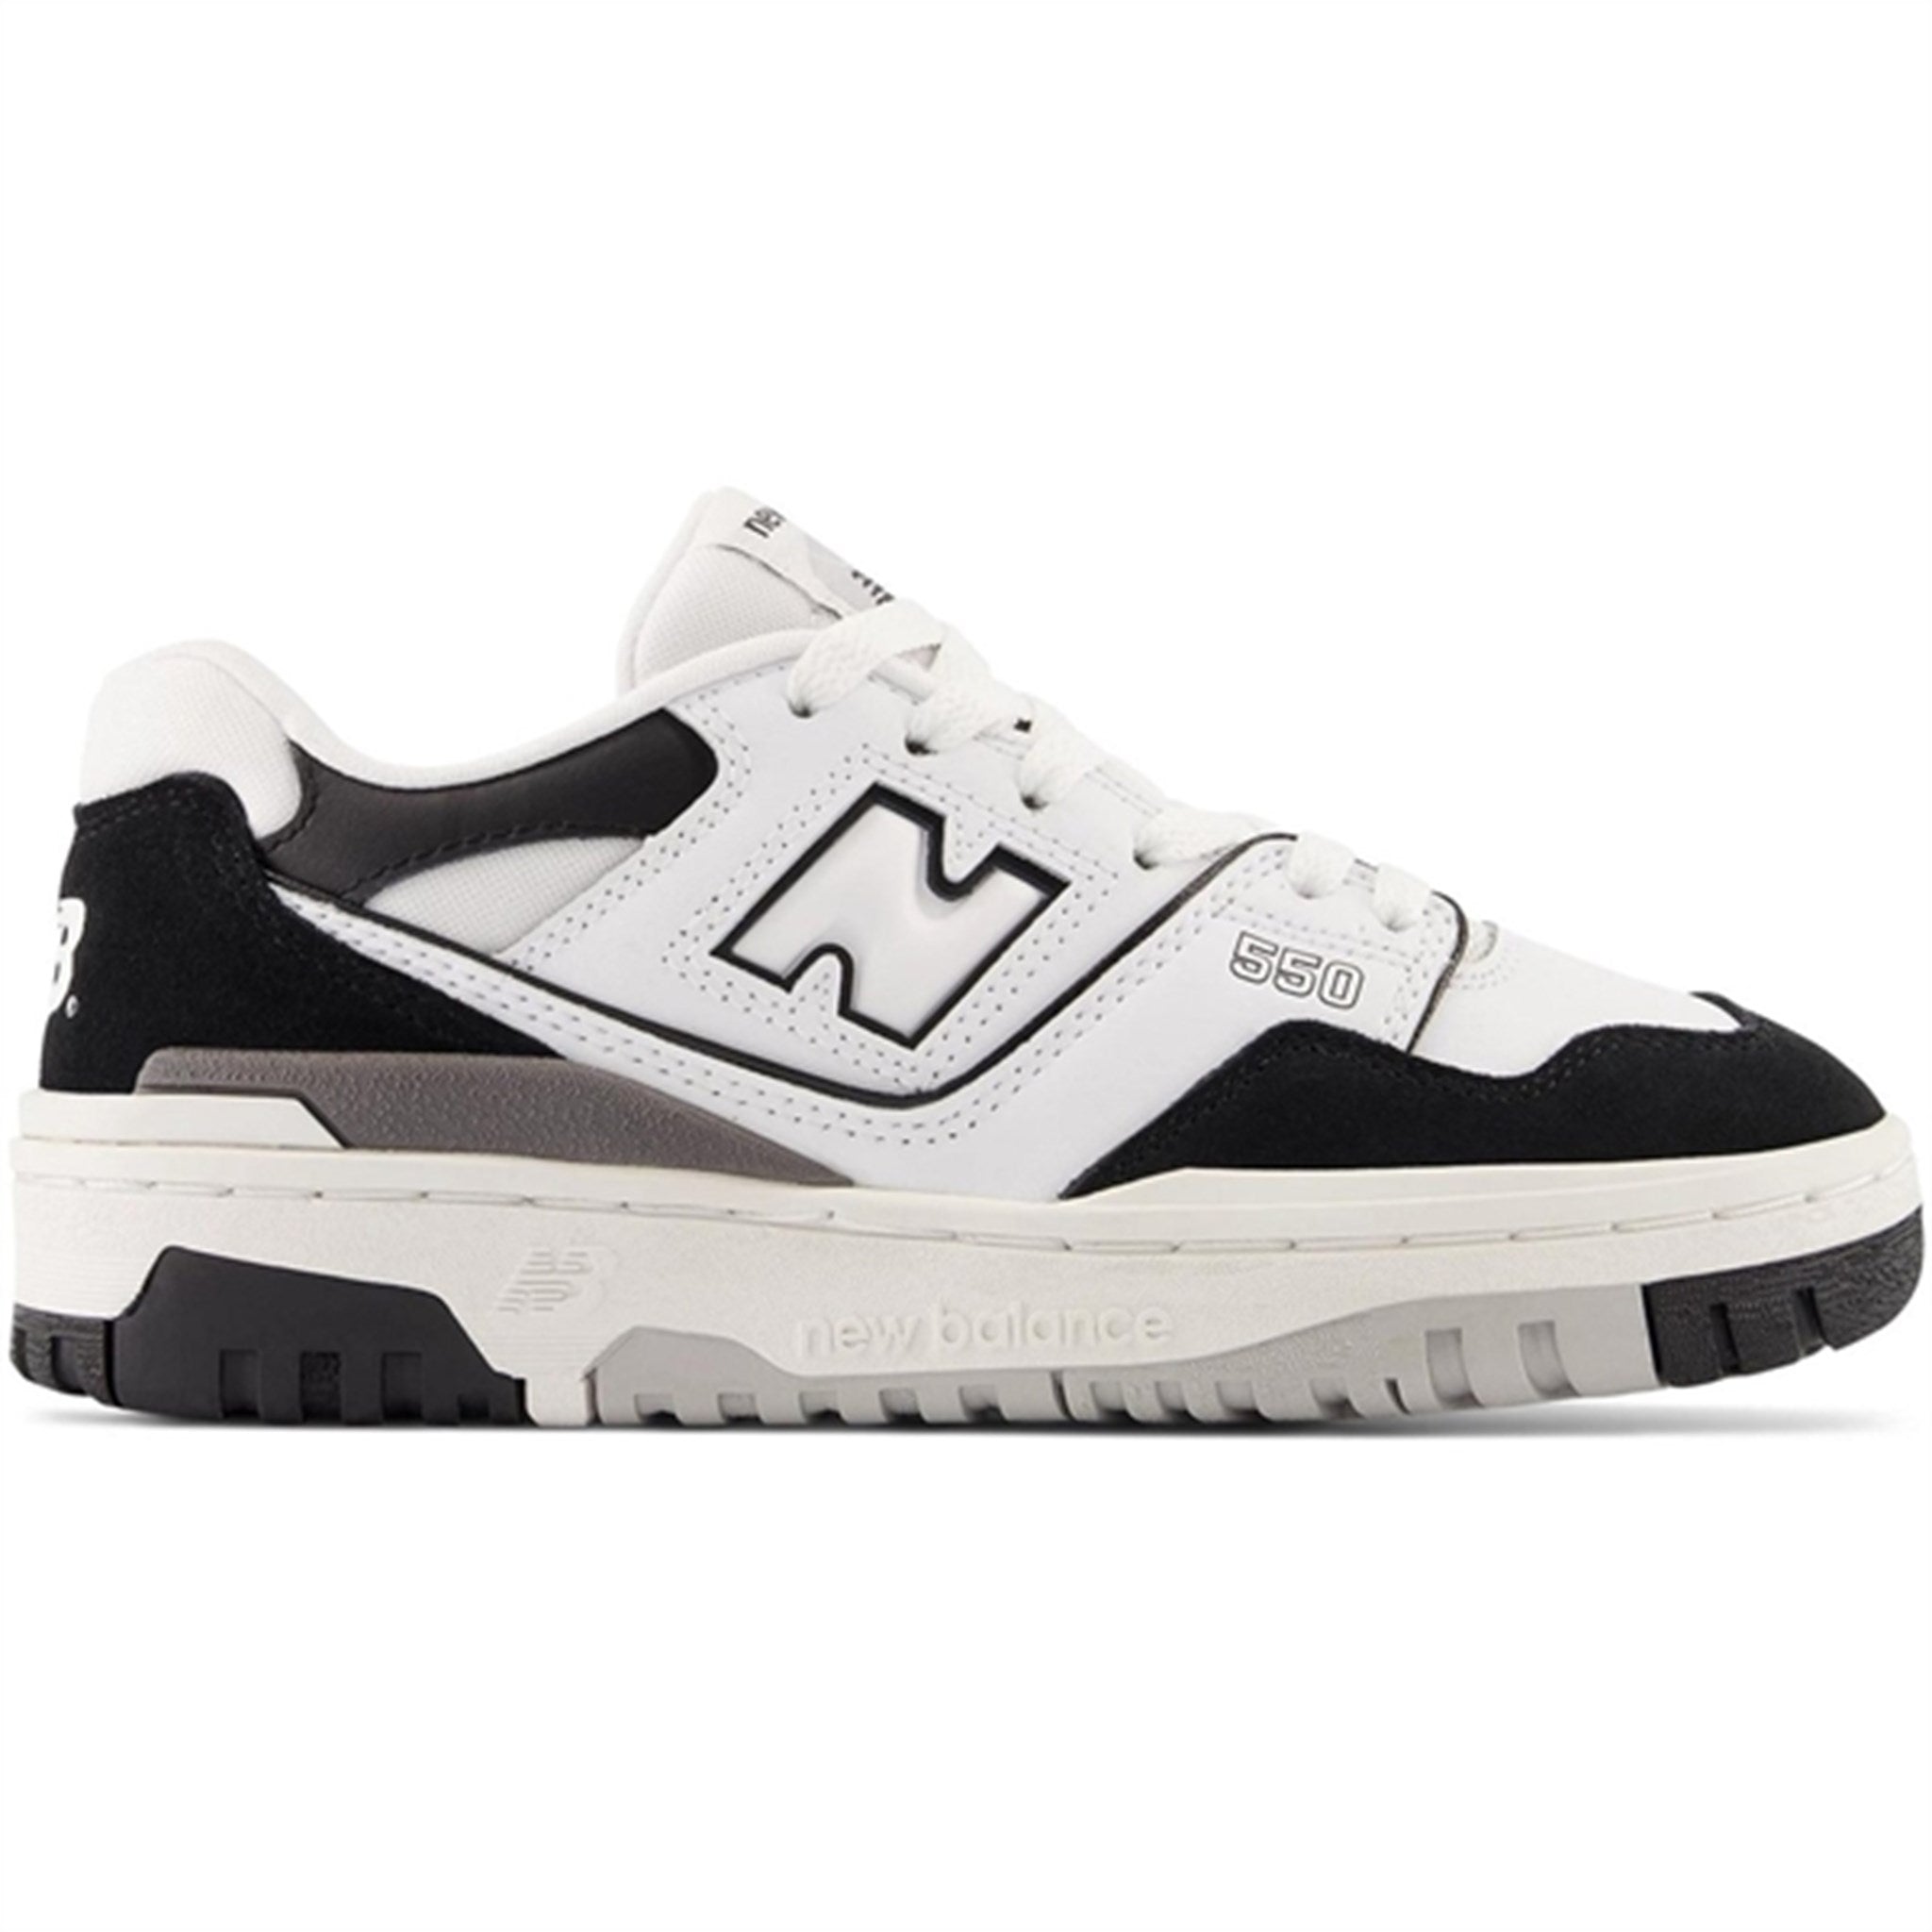 New Balance BB550 Kids Bungee Lace Sneakers White